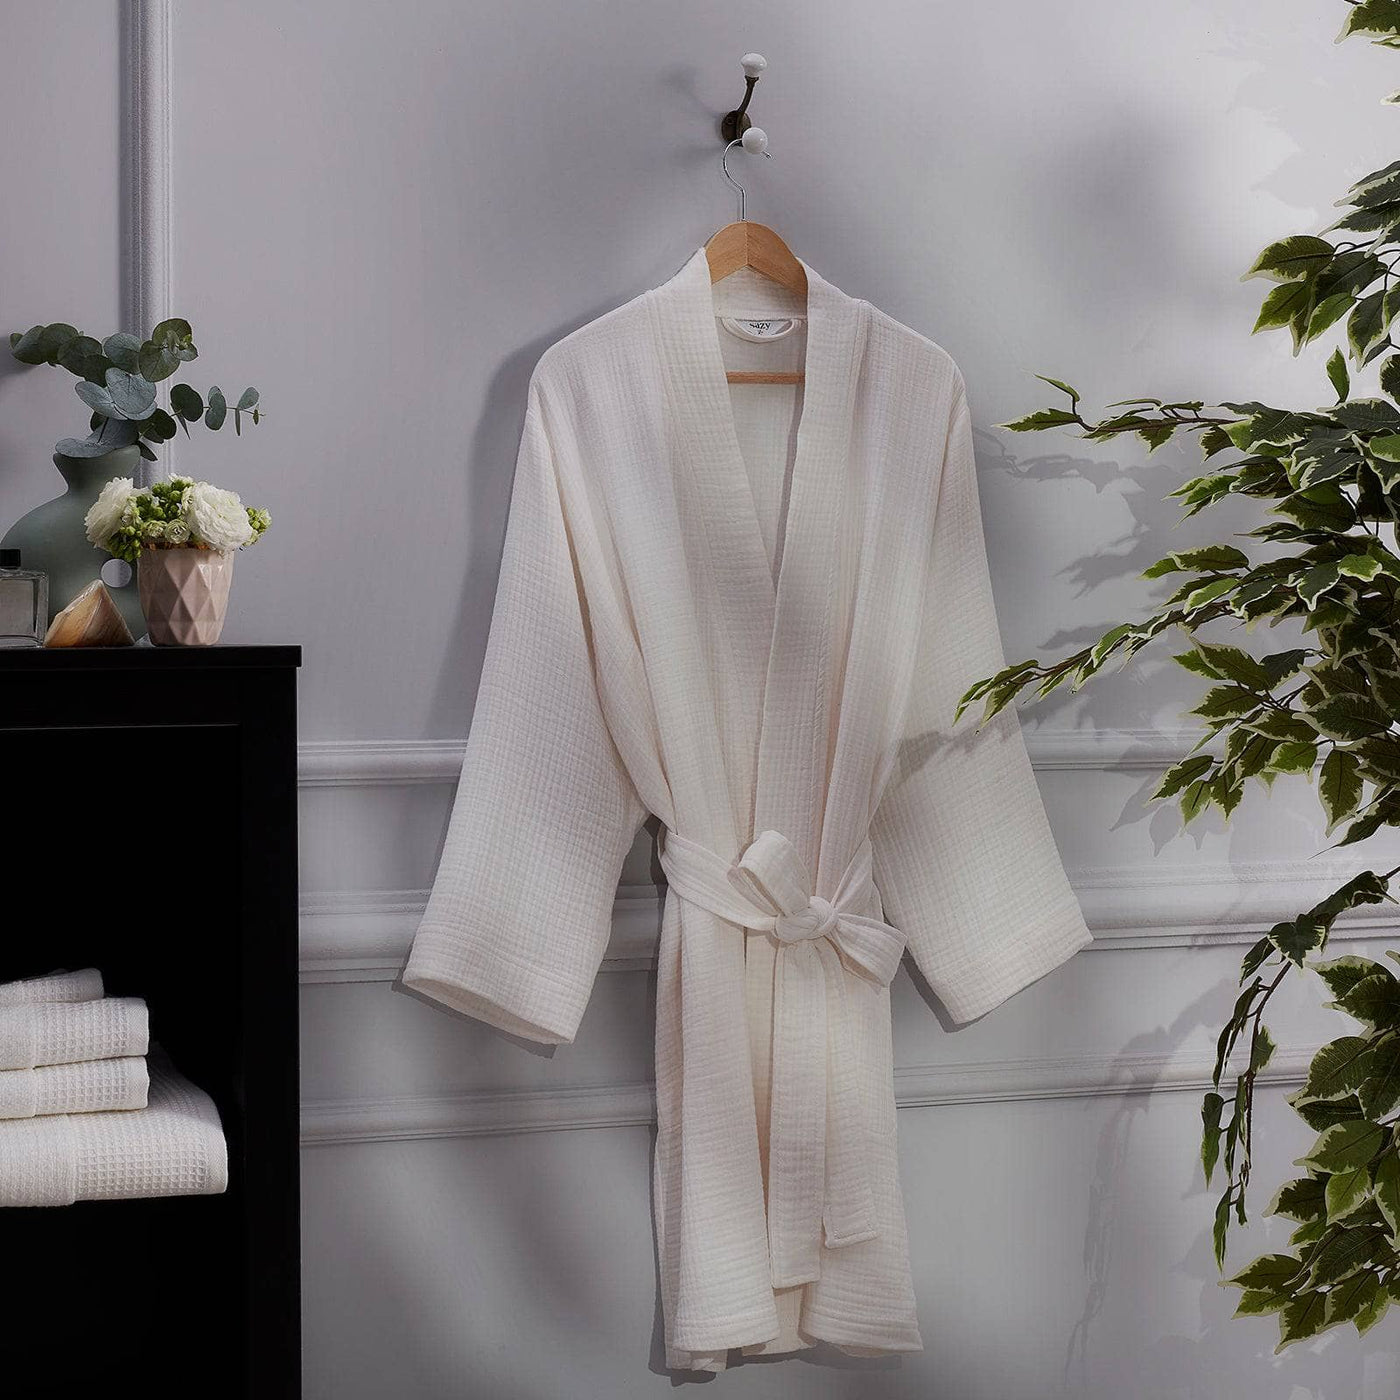 Rika Unisex 100% Turkish Cotton Dressing Gown, Off-White, L Dressing Gowns sazy.com